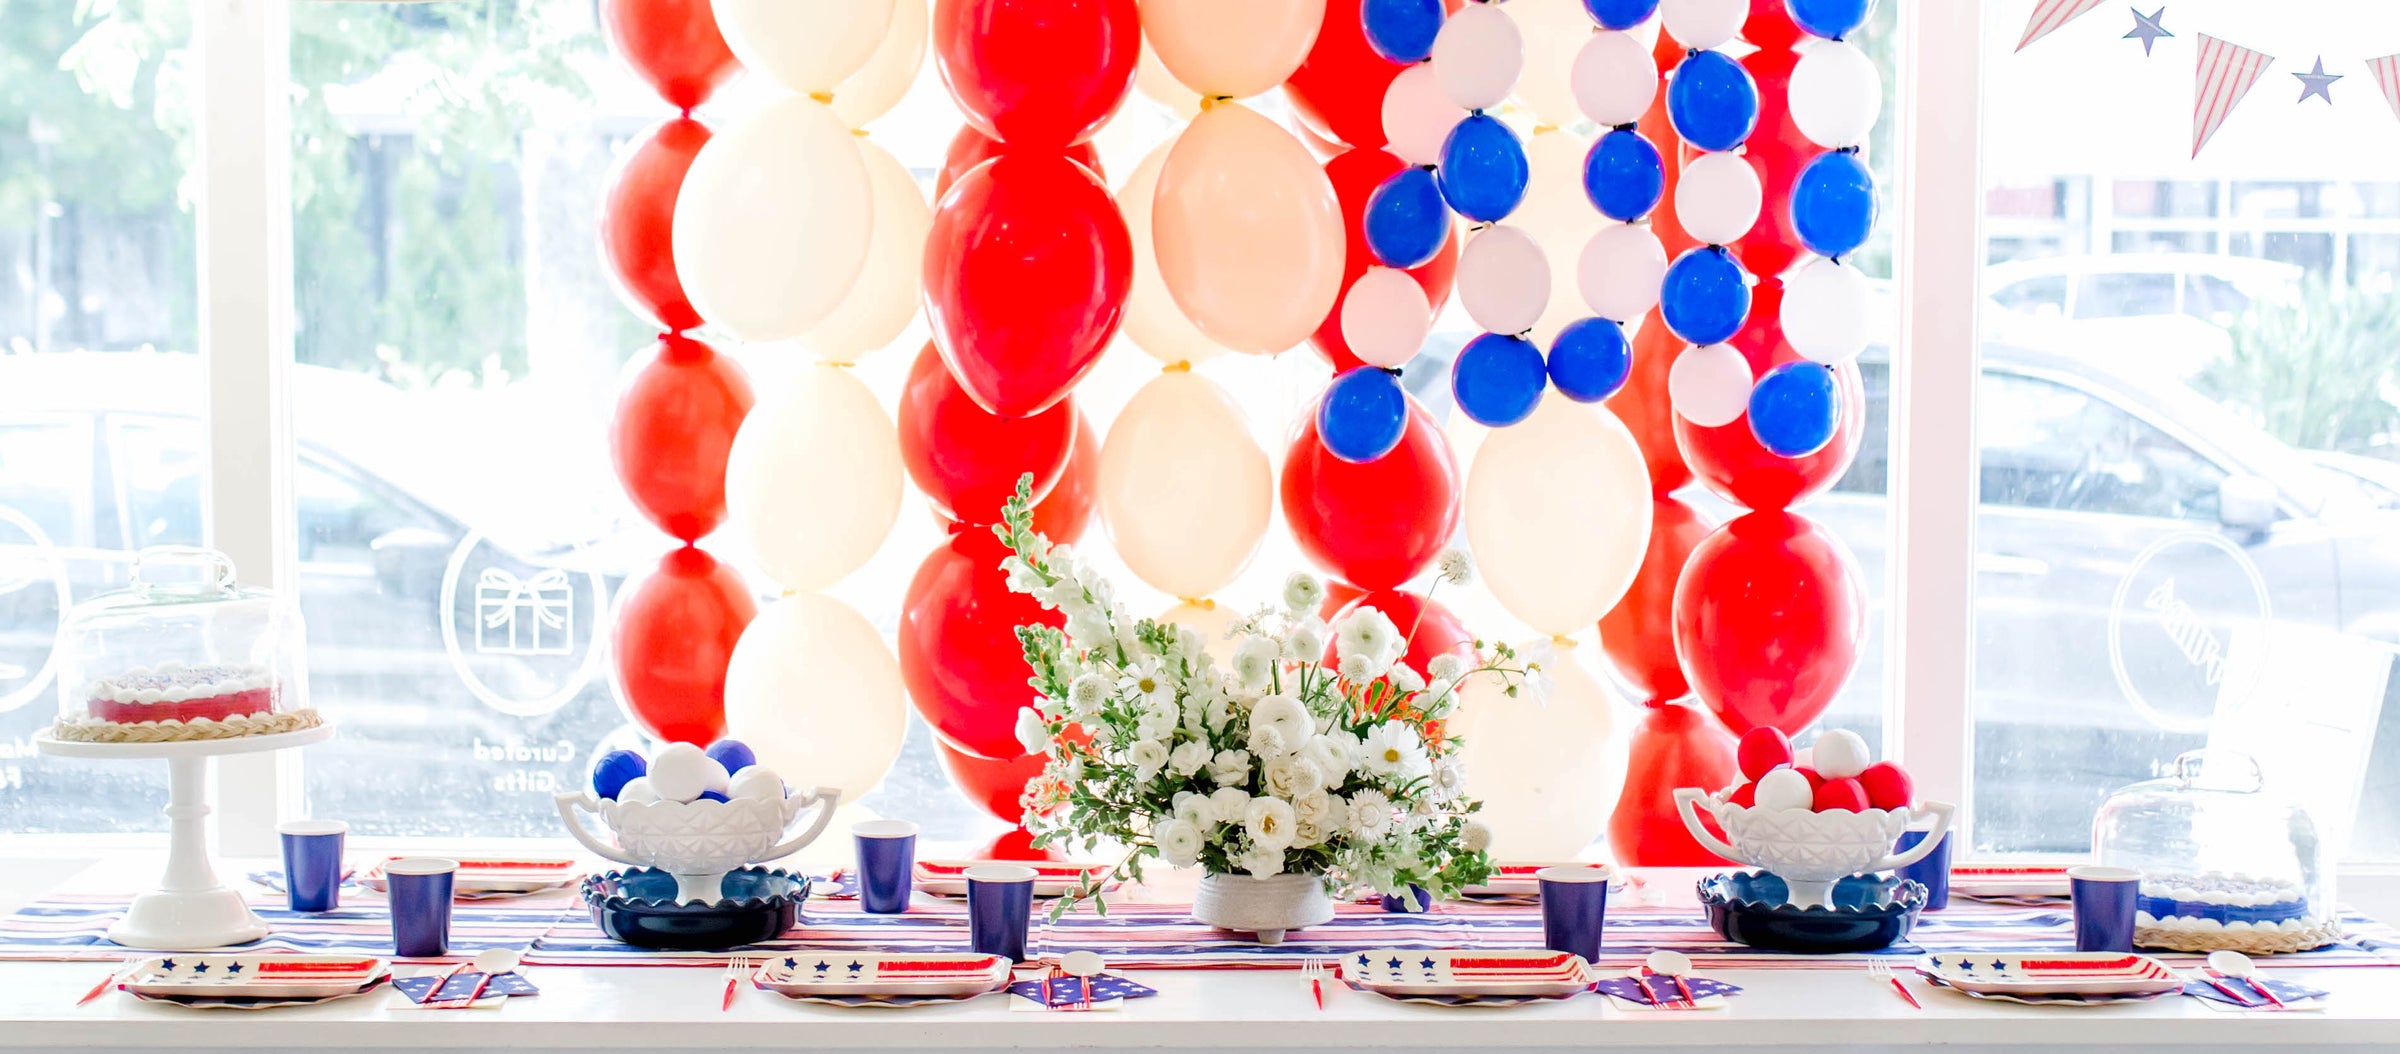 4th of July party supplies July 4th party ideas Independence Day decorations 